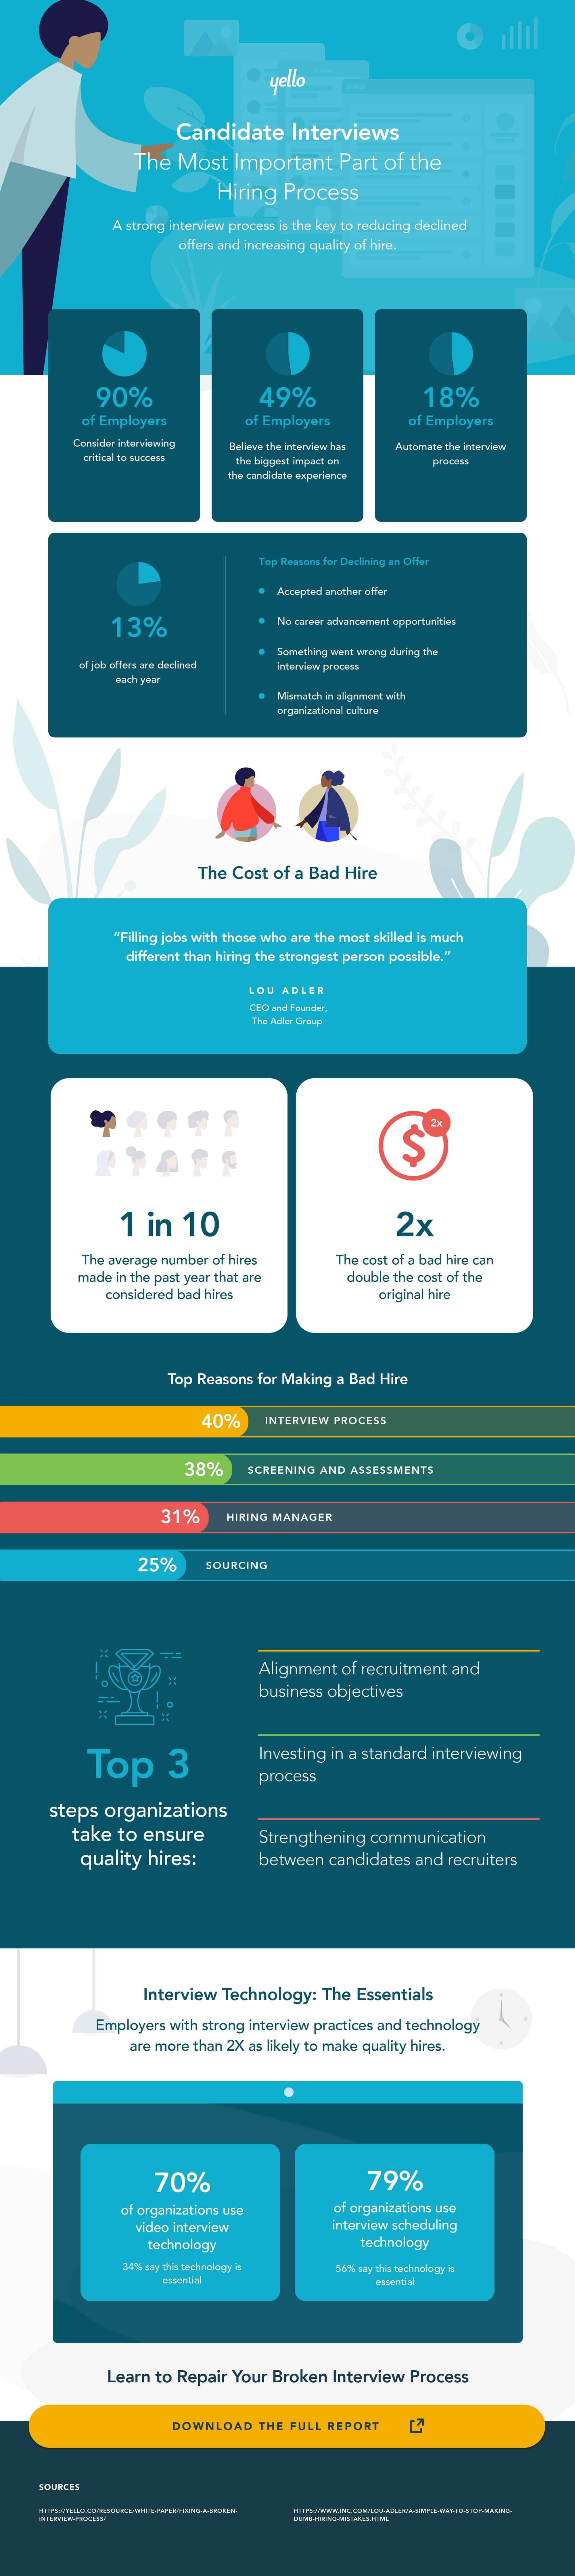 Infographic explaining recruiter data about the importance of the interview